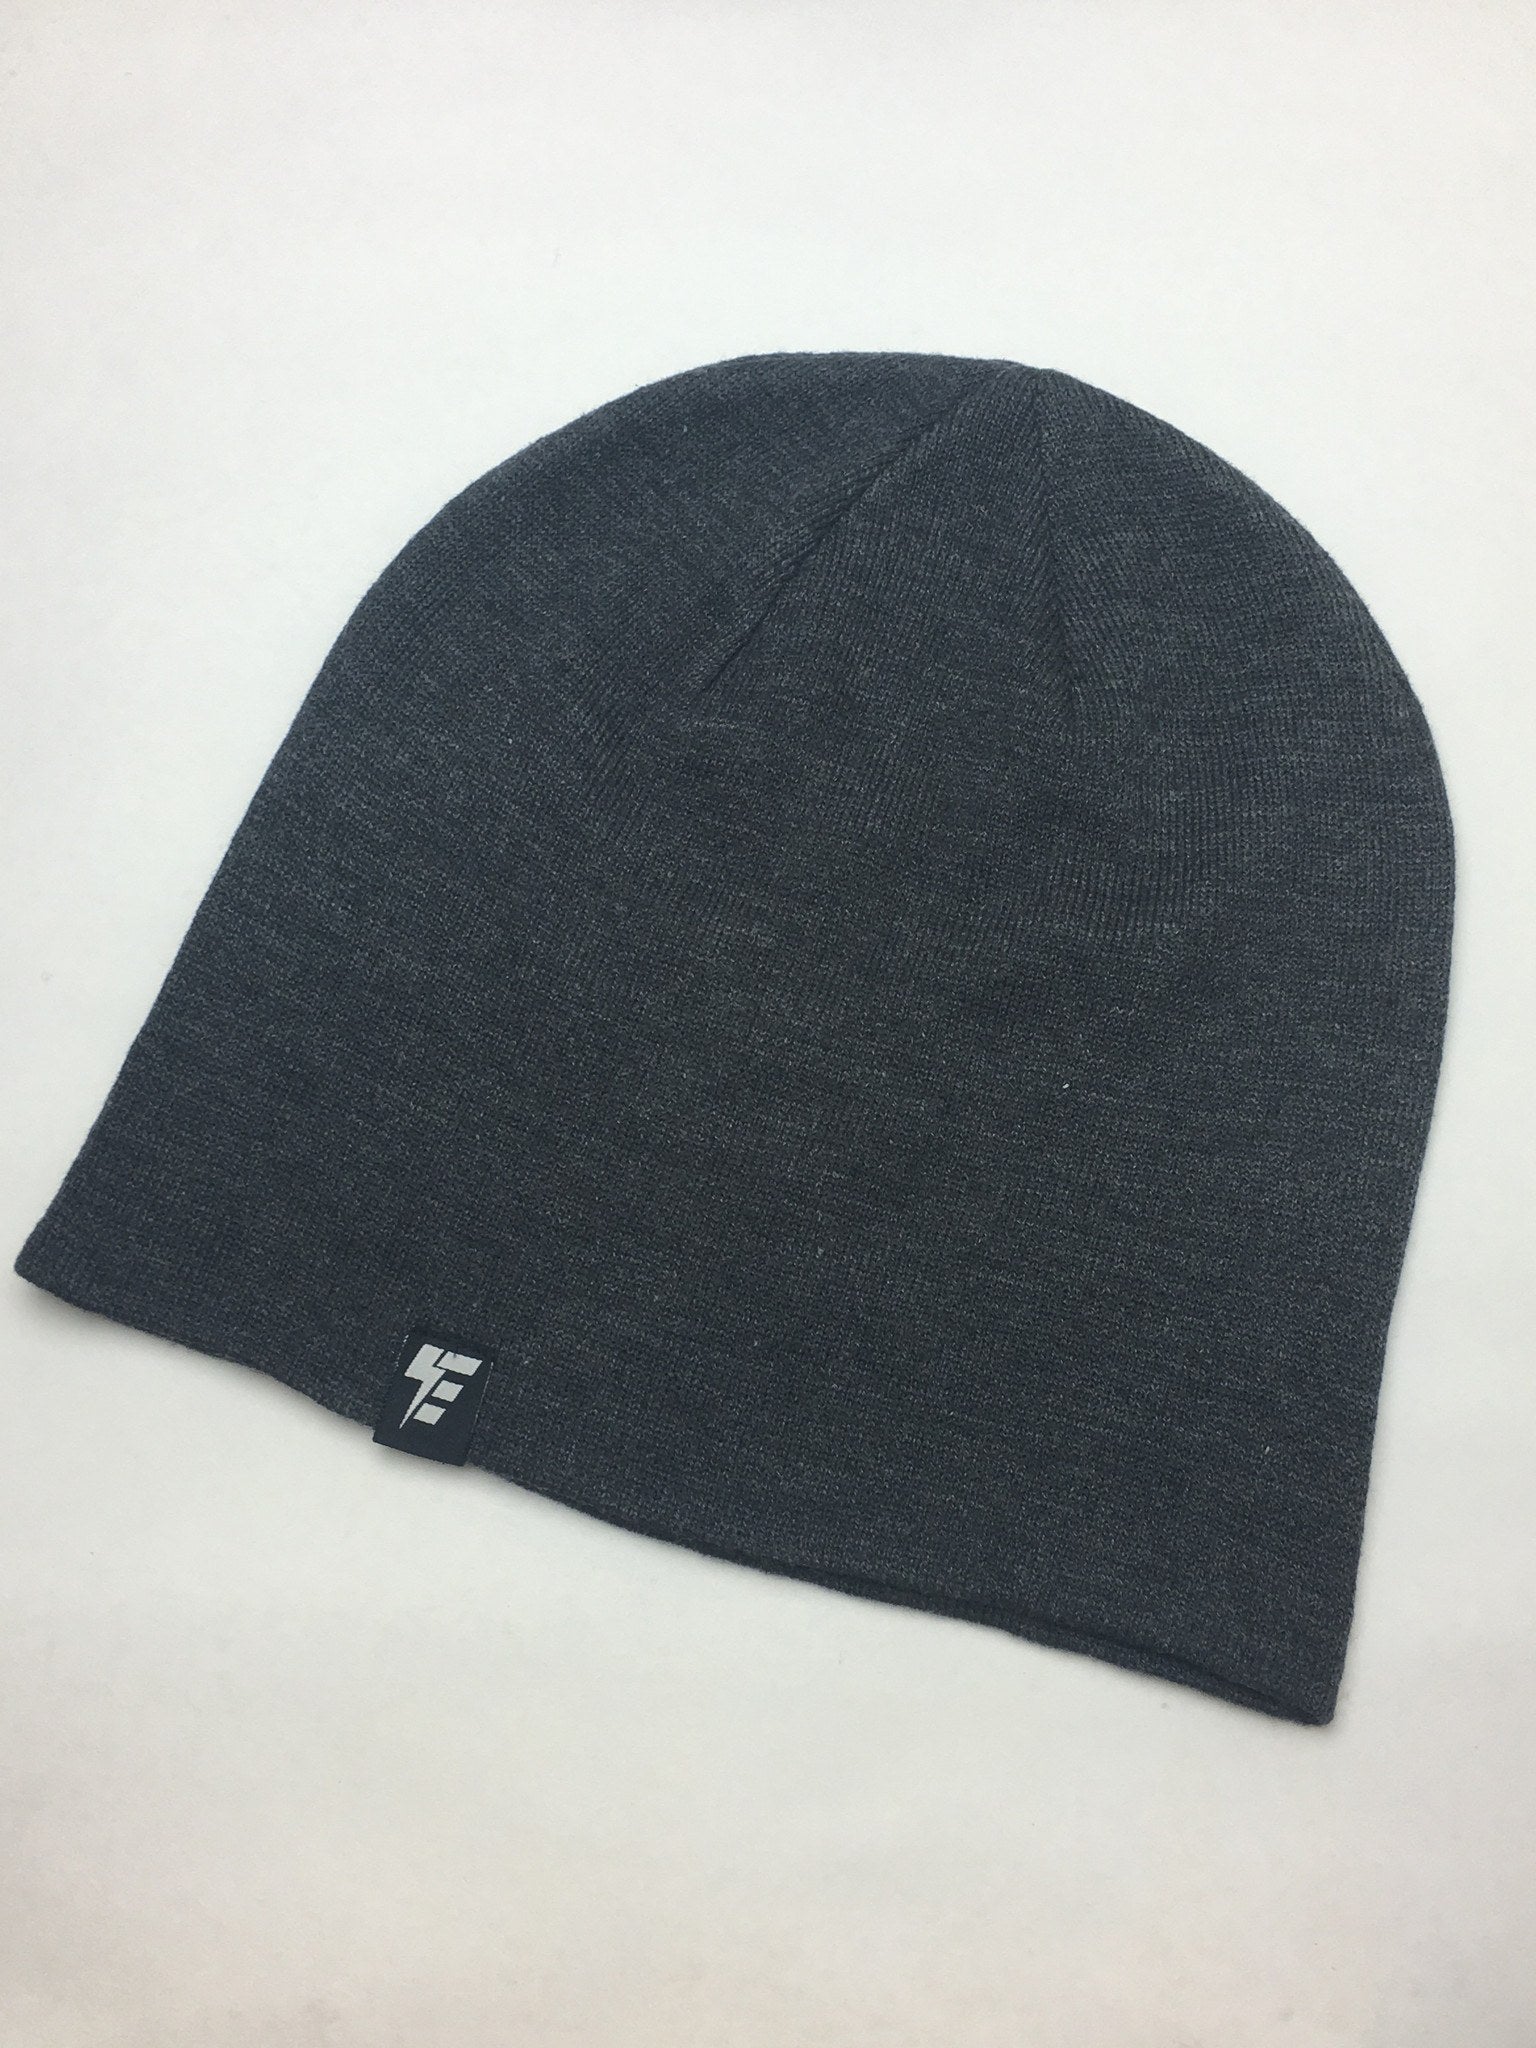 Charcoal Slouch Beanie Hat Electro Threads 